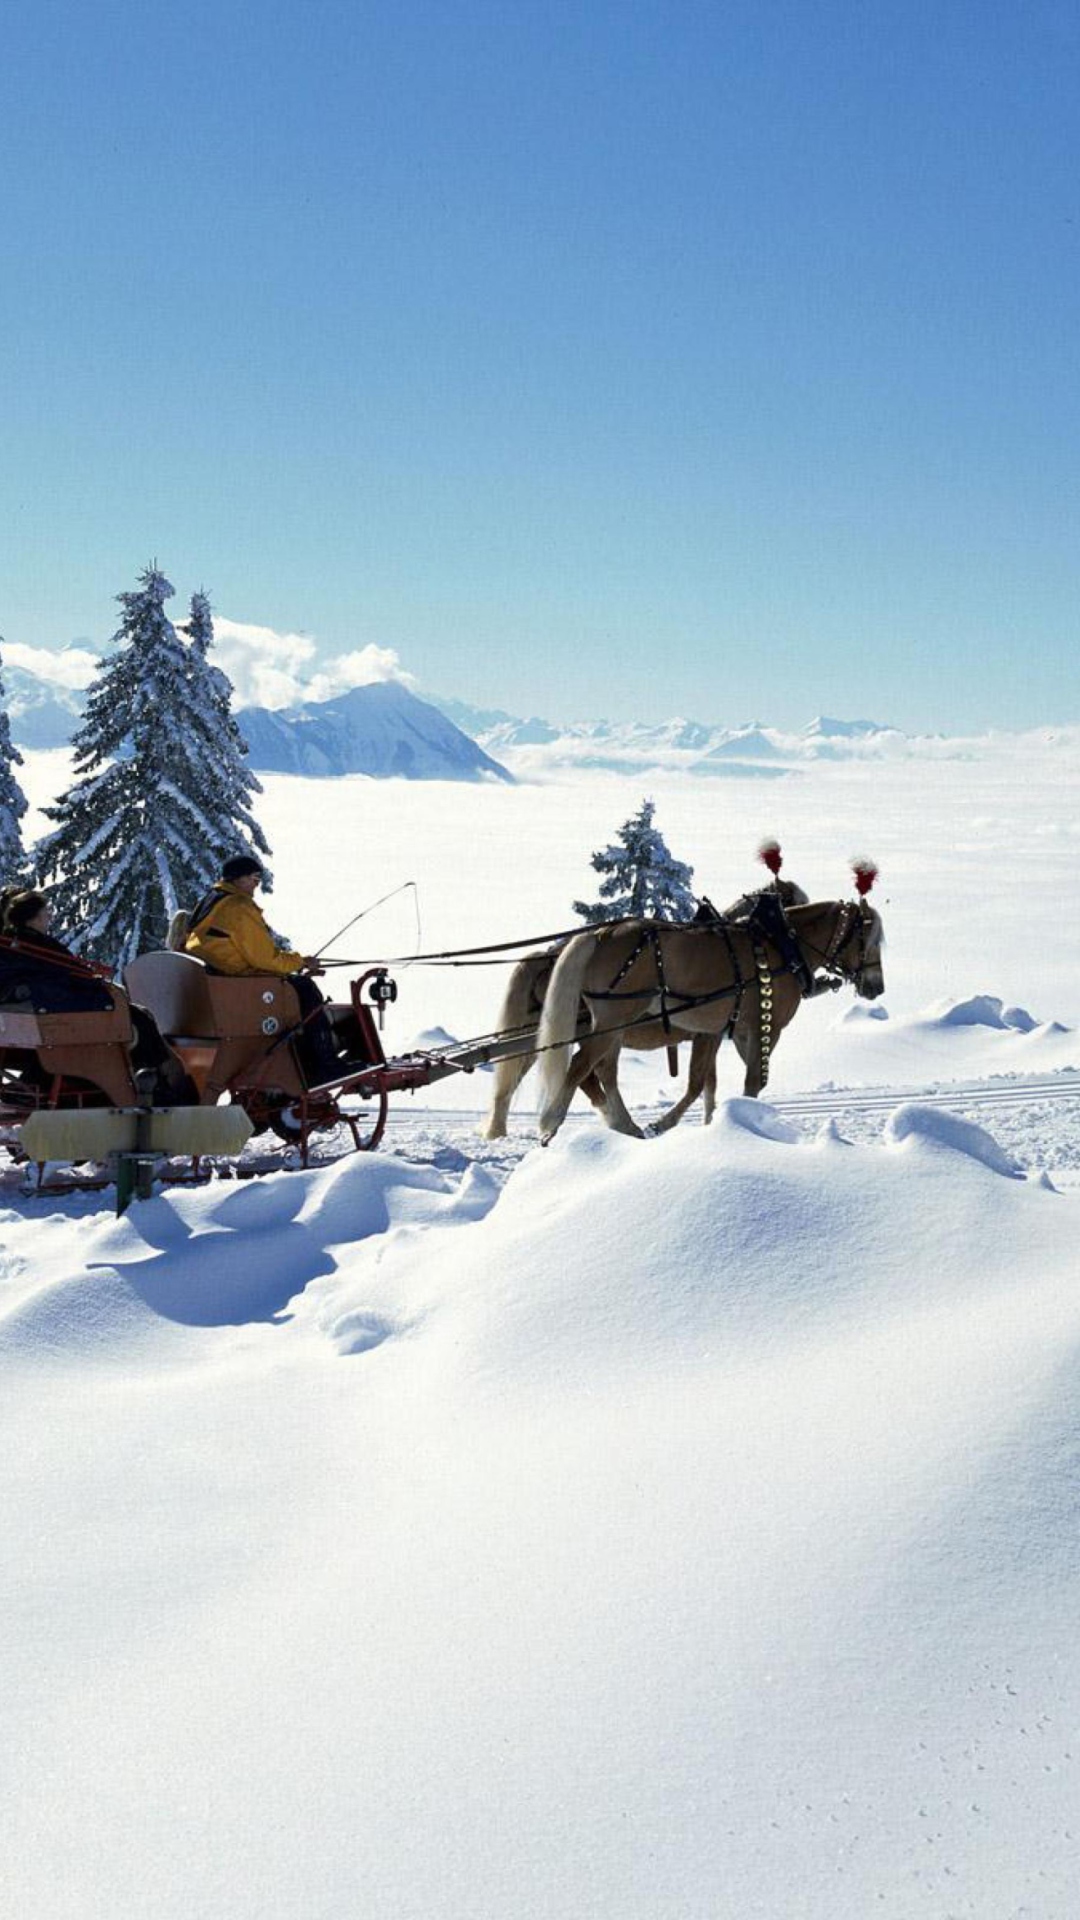 Winter Snow And Sleigh With Horses wallpaper 1080x1920